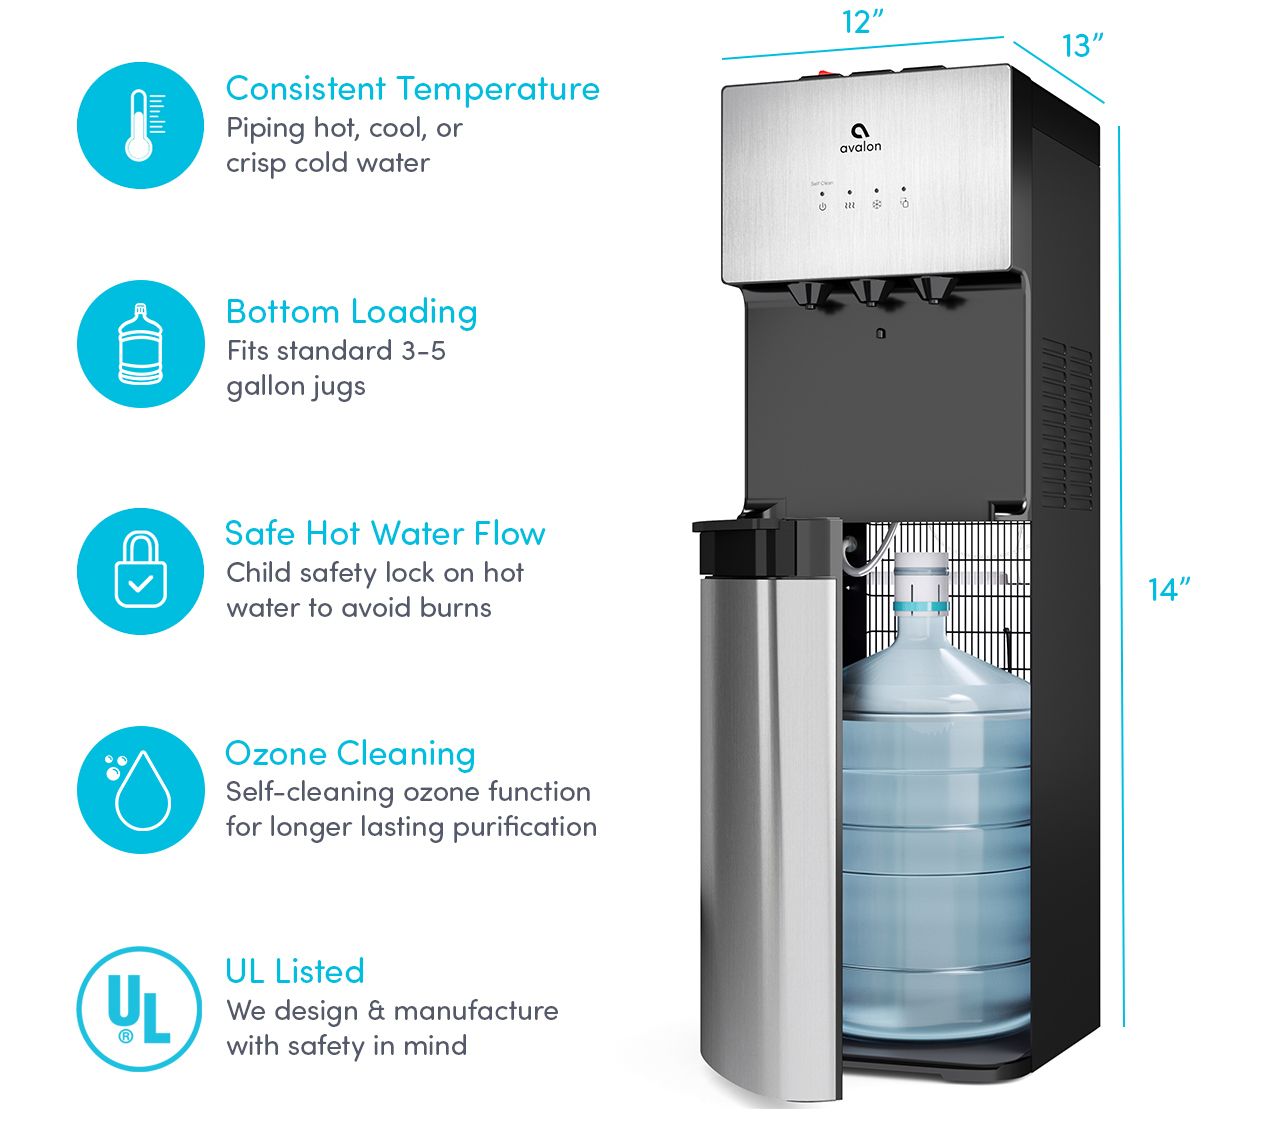 Sunpentown 5.0 Liter Hot Water Dispenser with Multi-Temp Function,  Stainless Steel